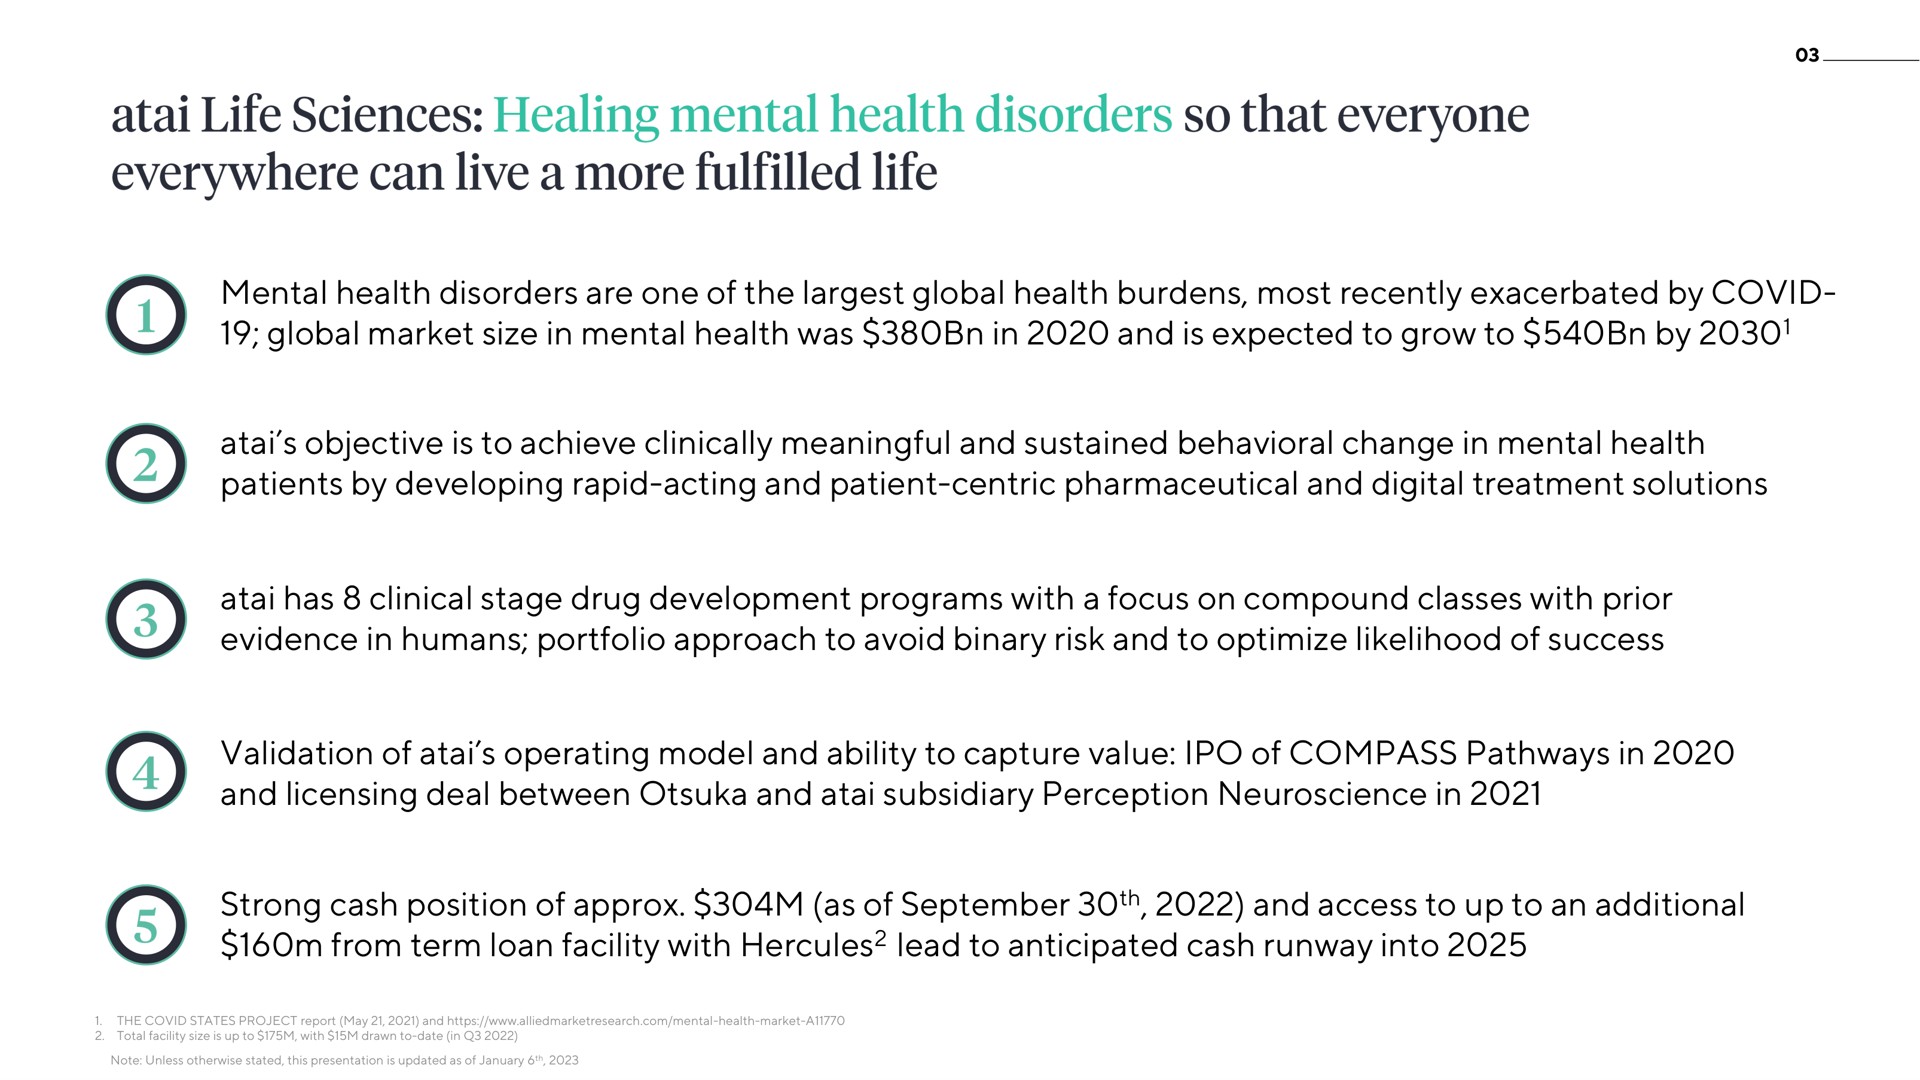 mental health disorders are one of the global health burdens most recently exacerbated by covid global market size in mental health was in and is expected to grow to by objective is to achieve clinically meaningful and sustained behavioral change in mental health patients by developing rapid acting and patient centric pharmaceutical and digital treatment solutions has clinical stage drug development programs with a focus on compound classes with prior evidence in humans portfolio approach to avoid binary risk and to optimize likelihood of success validation of operating model and ability to capture value of compass pathways in and licensing deal between and subsidiary perception in strong cash position of as of and access to up to an additional from term loan facility with lead to anticipated cash runway into life sciences everywhere can more ear it life so that everyone | ATAI